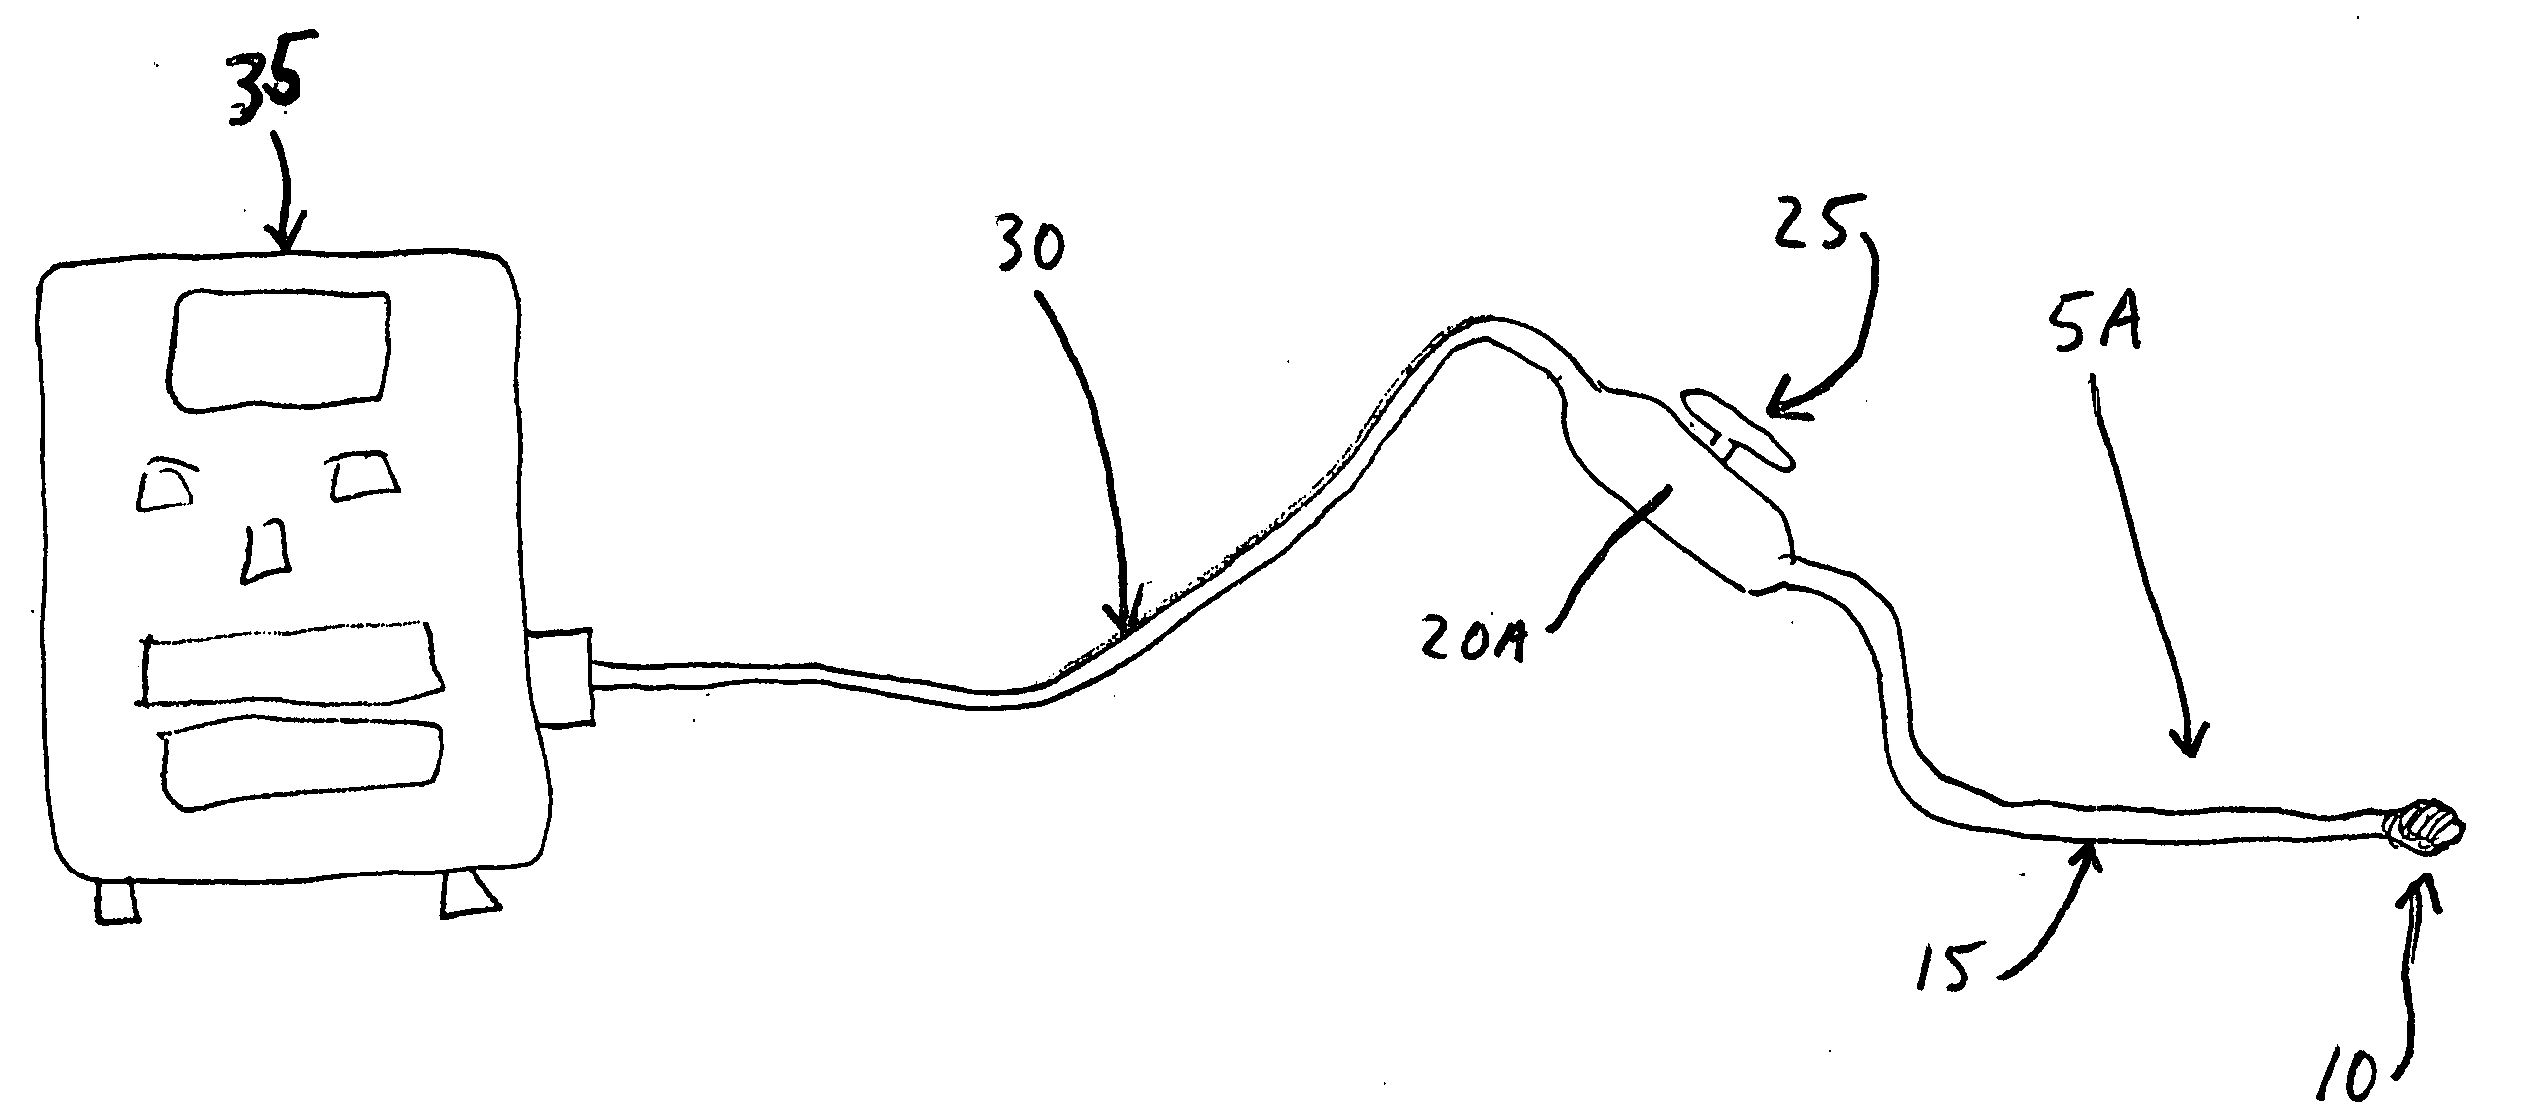 Apparatus and method for holding a transesophageal echocardiography probe